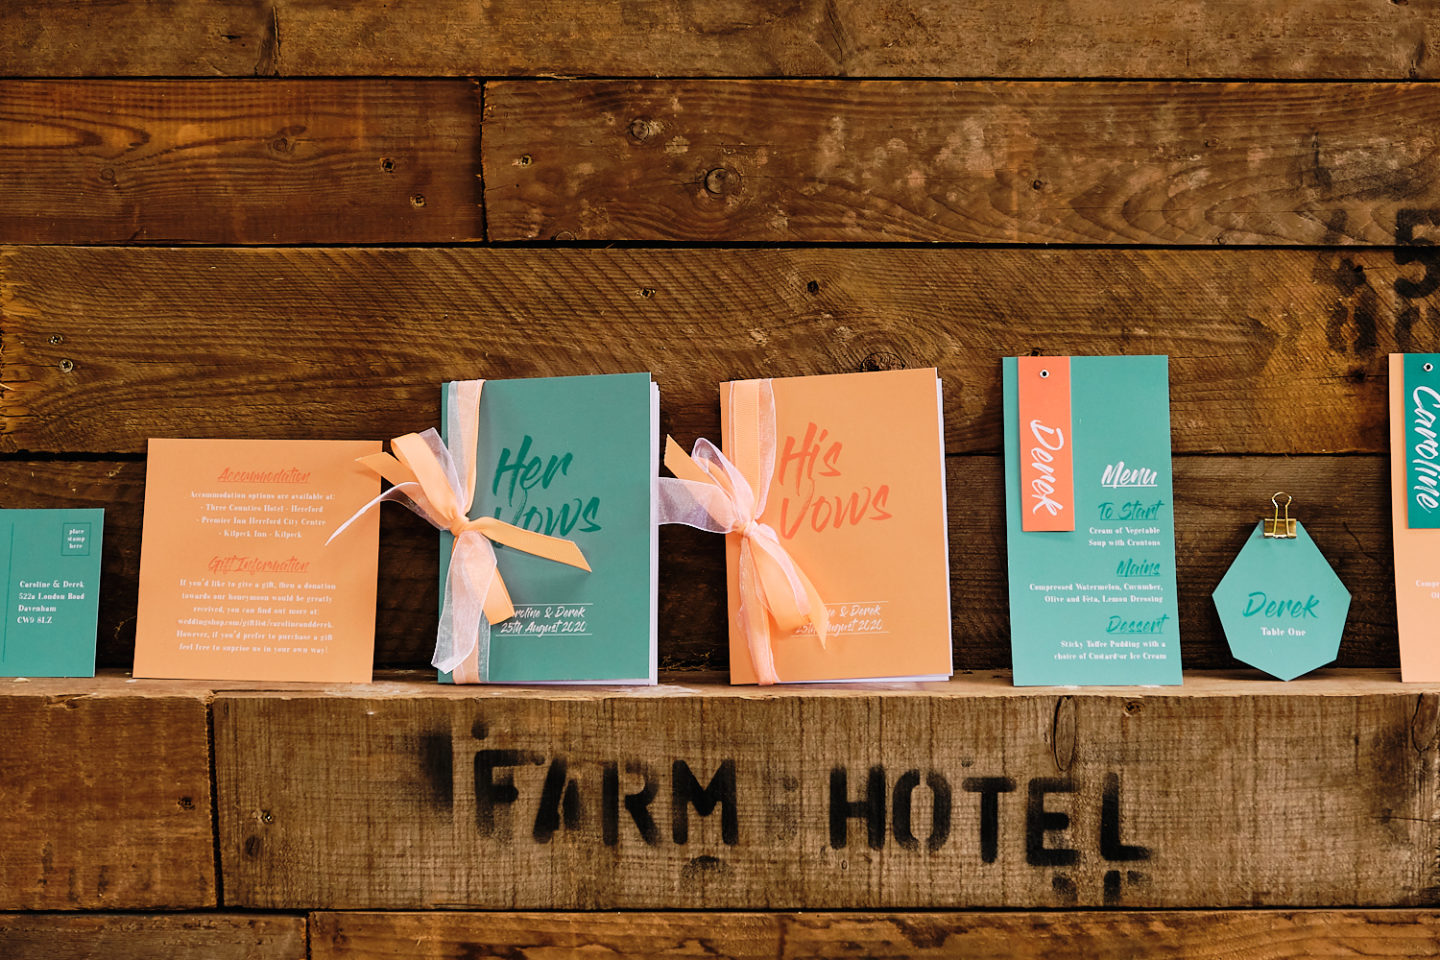 Bright and Bold Wedding With Country Vibes at The Barn at Drovers, Wales